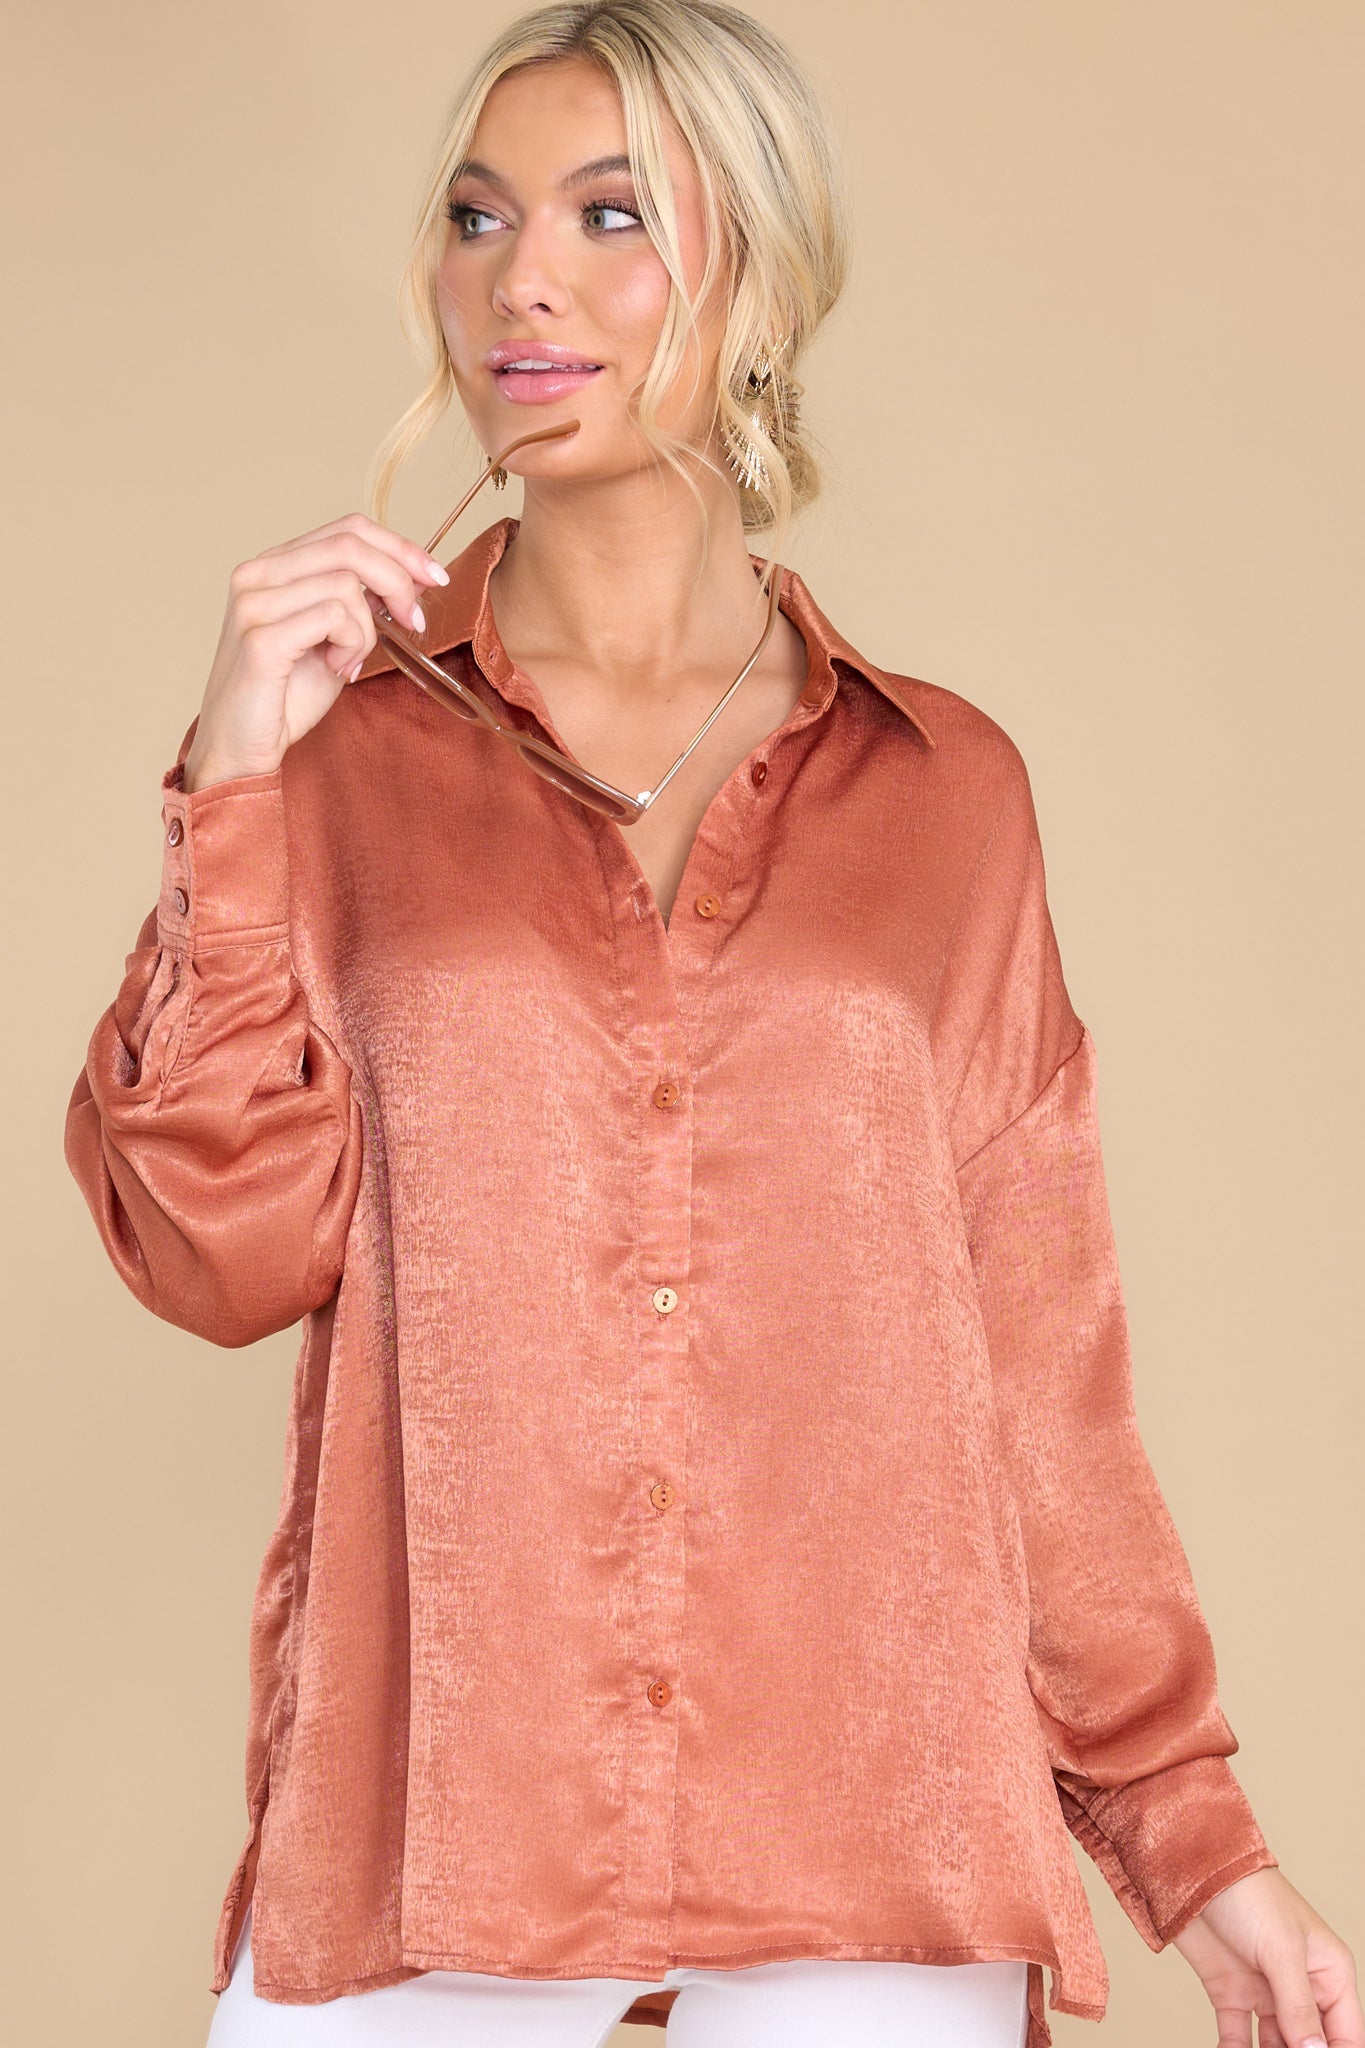 This terracotta colored top features a collared neckline, buttons down the front, buttons at the cuff, and a classic relaxed fit.